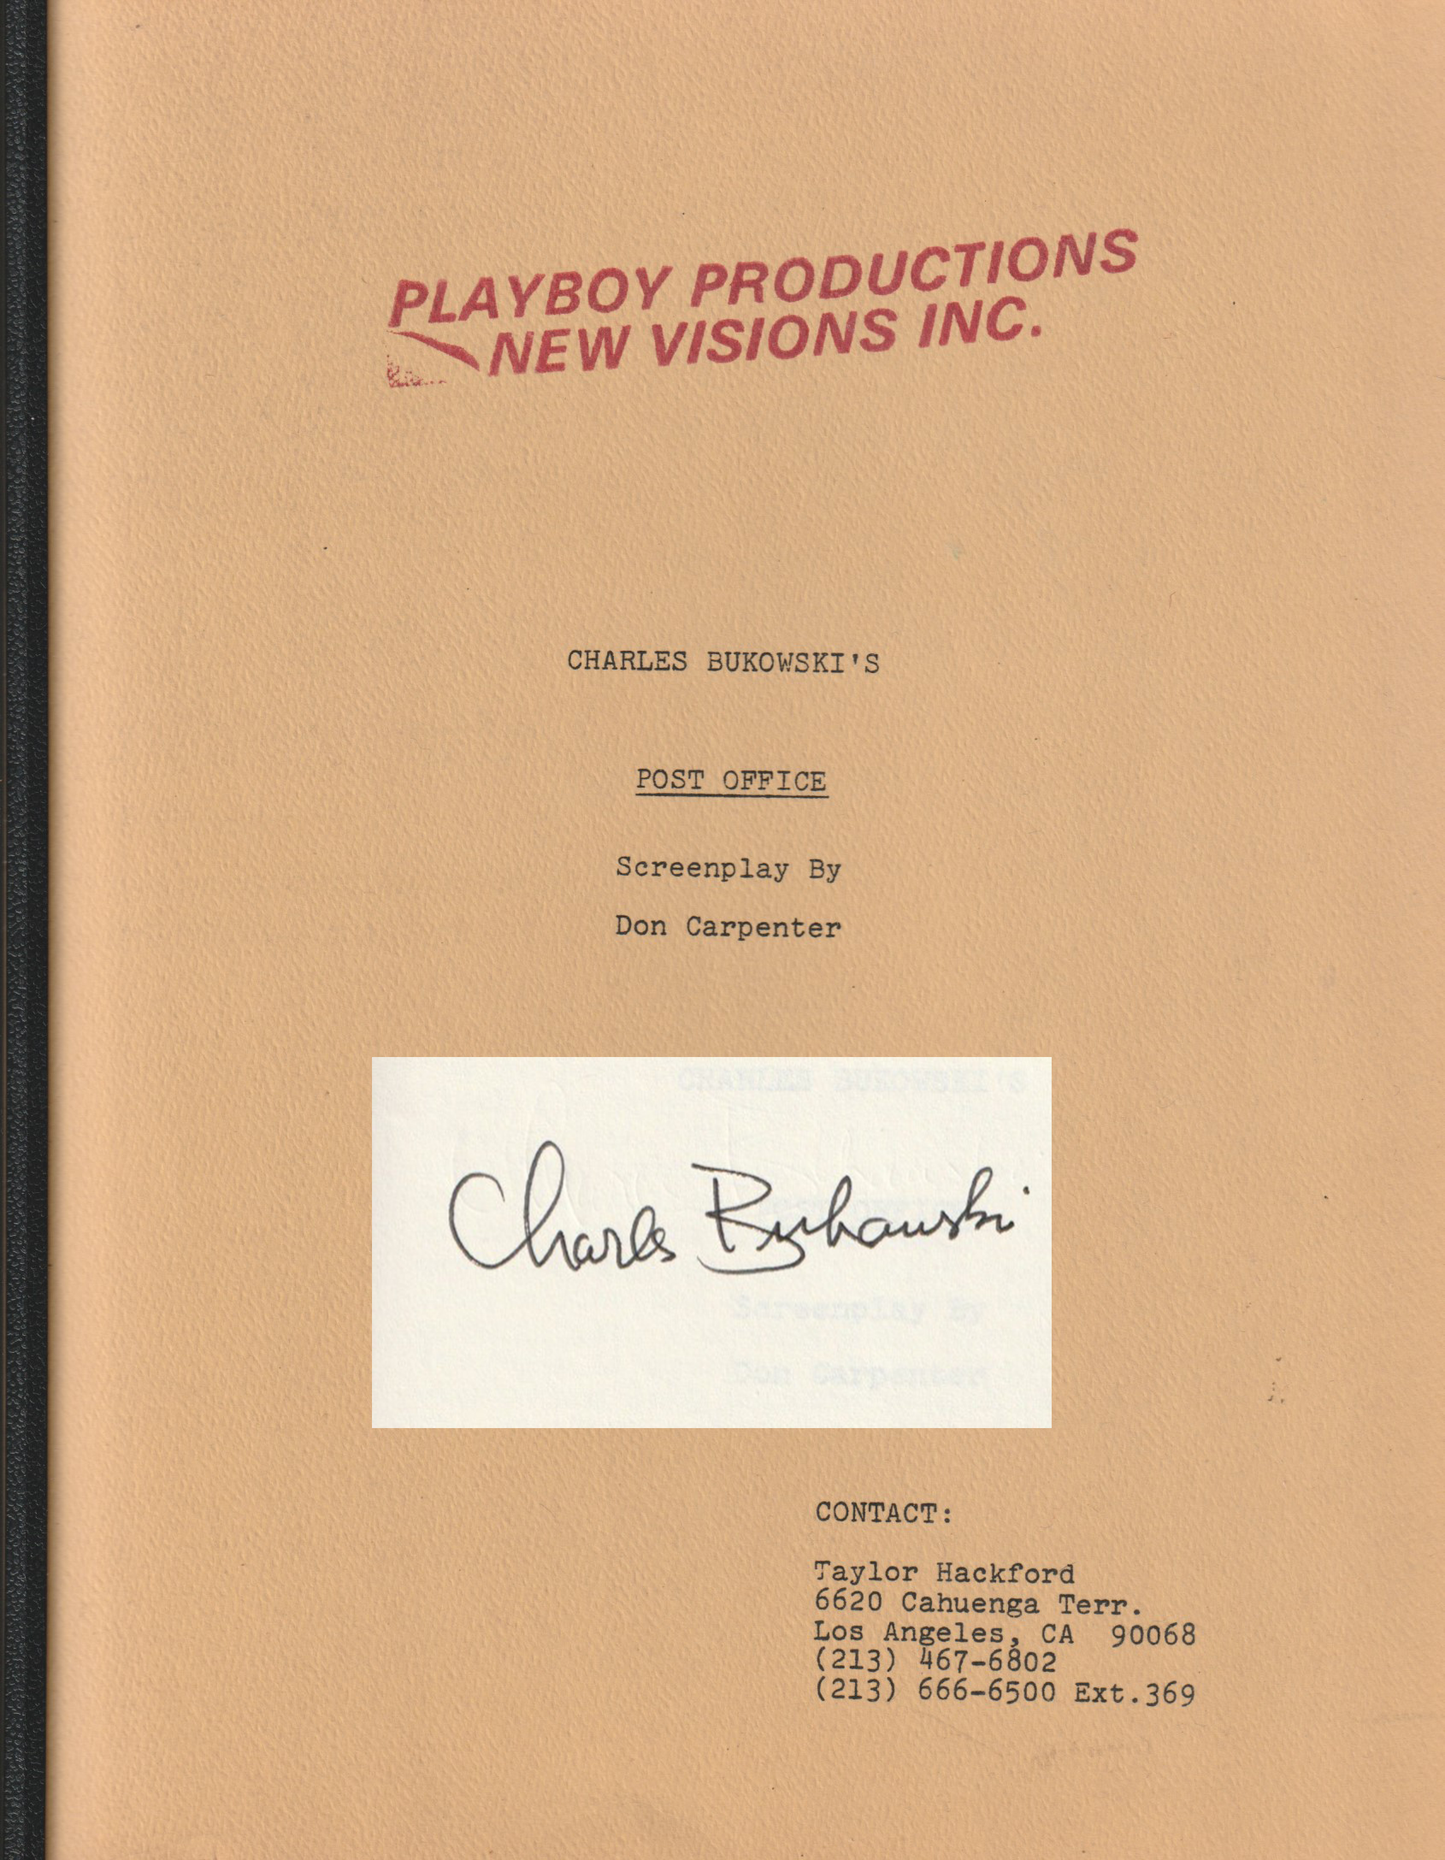 Post Office Screenplay Signed by Bukowski for a Taylor Hackford Film